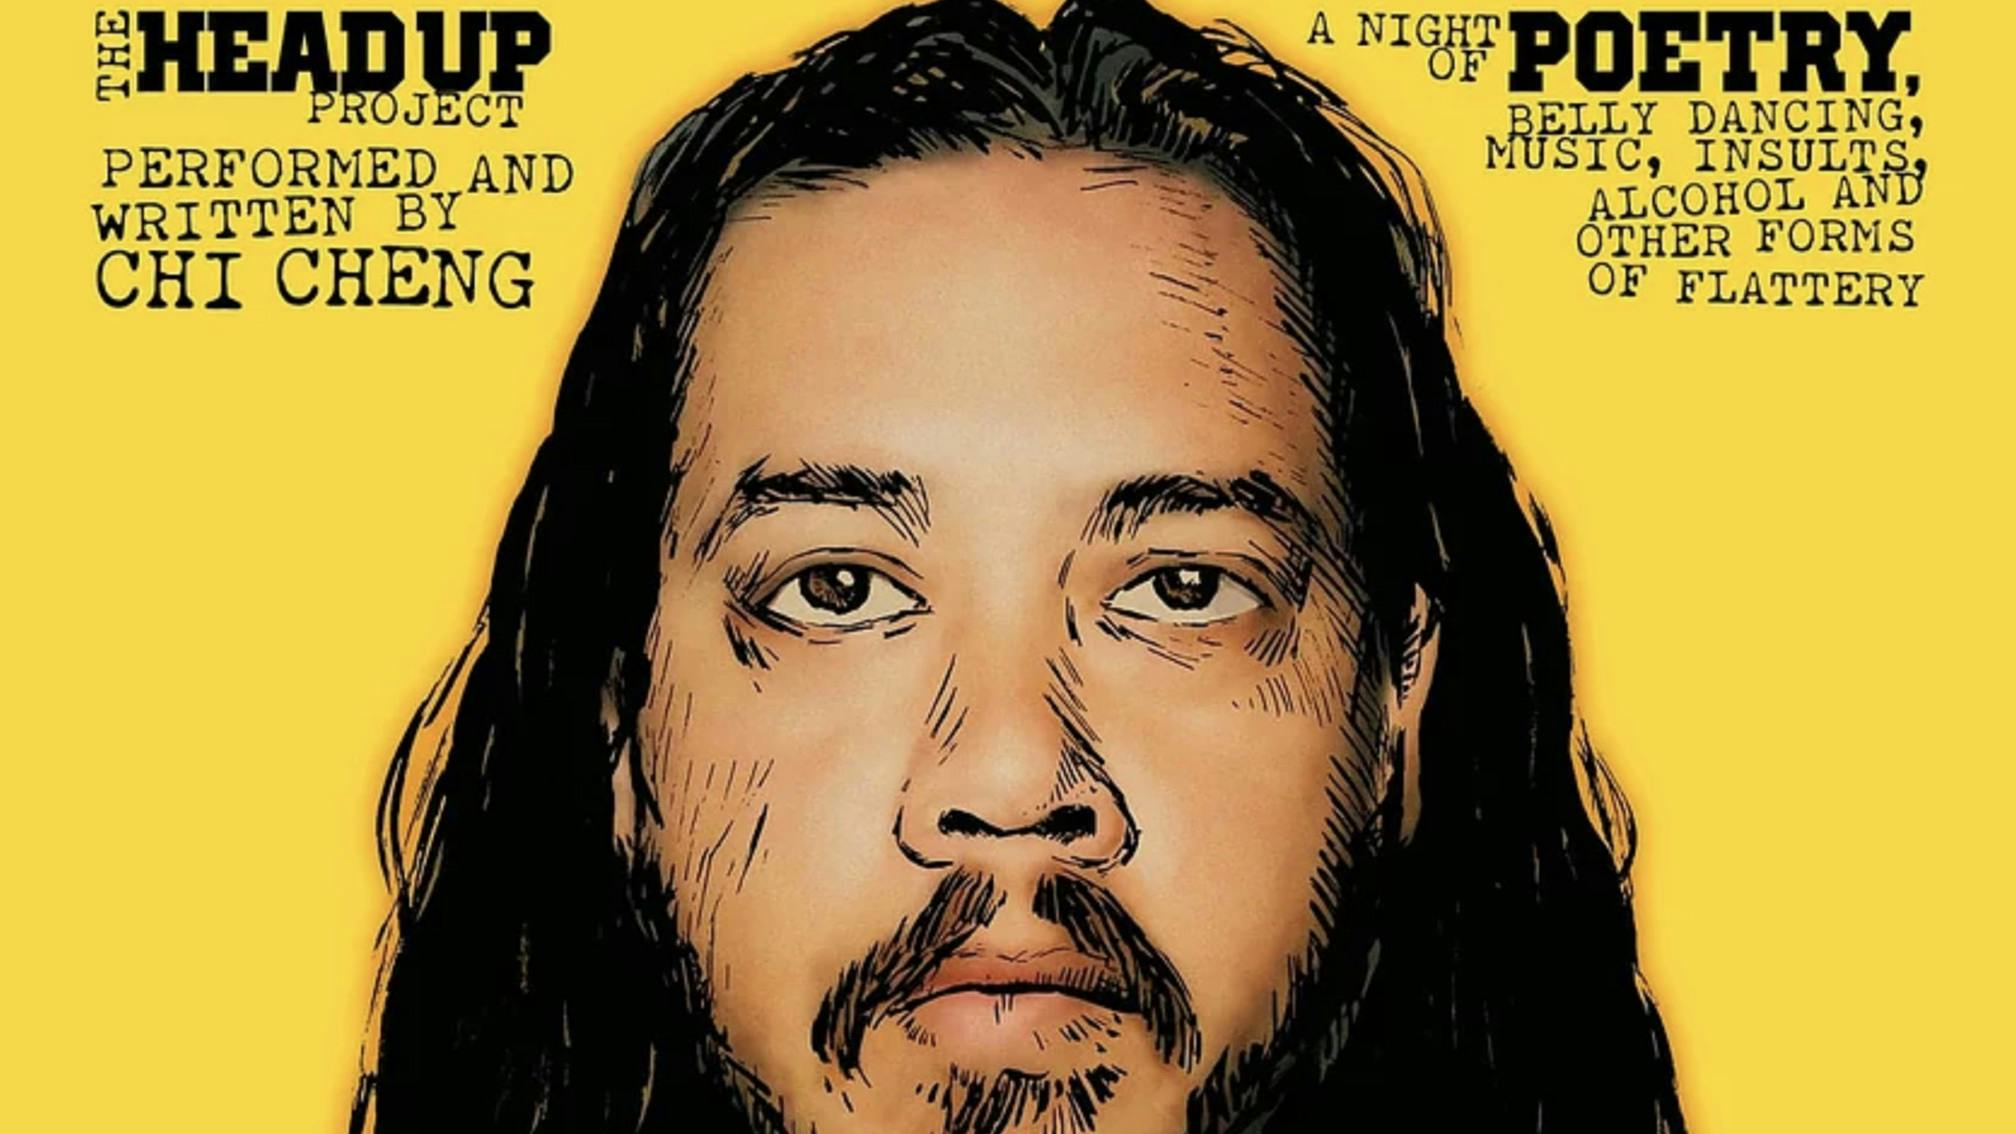 Limited-edition Chi Cheng spoken word album to be released in January